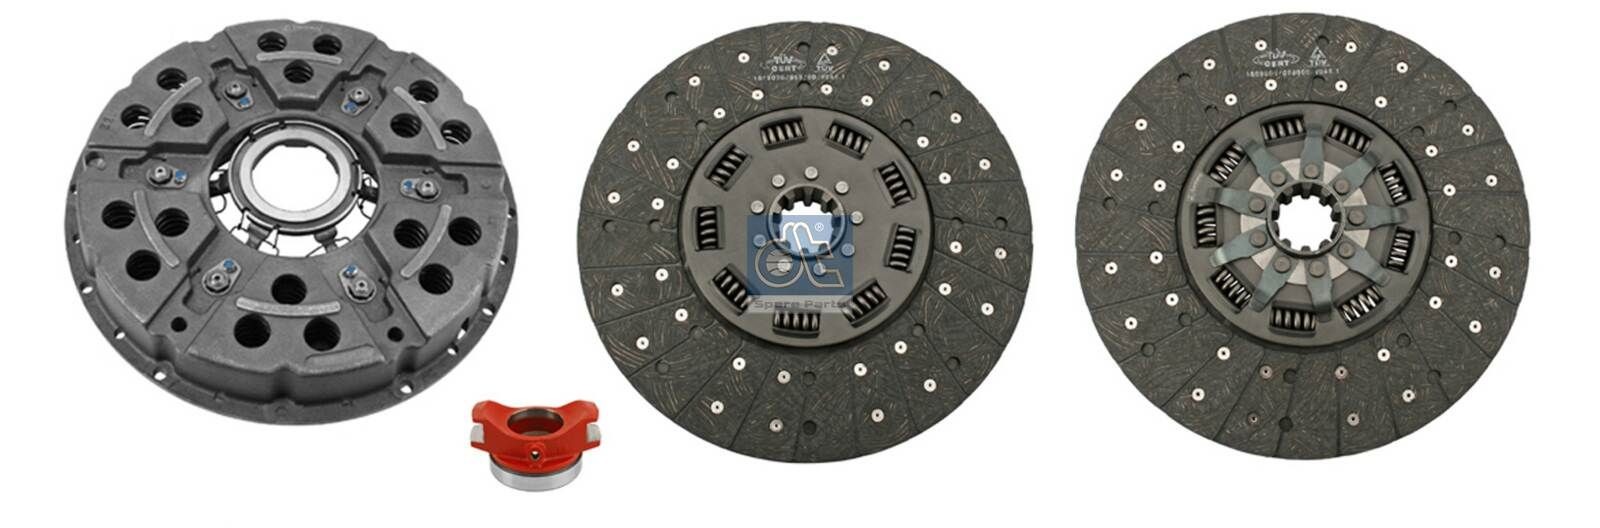 1800 106 033 DT Spare Parts 350mm Ø: 350mm Clutch replacement kit 2.93031 buy